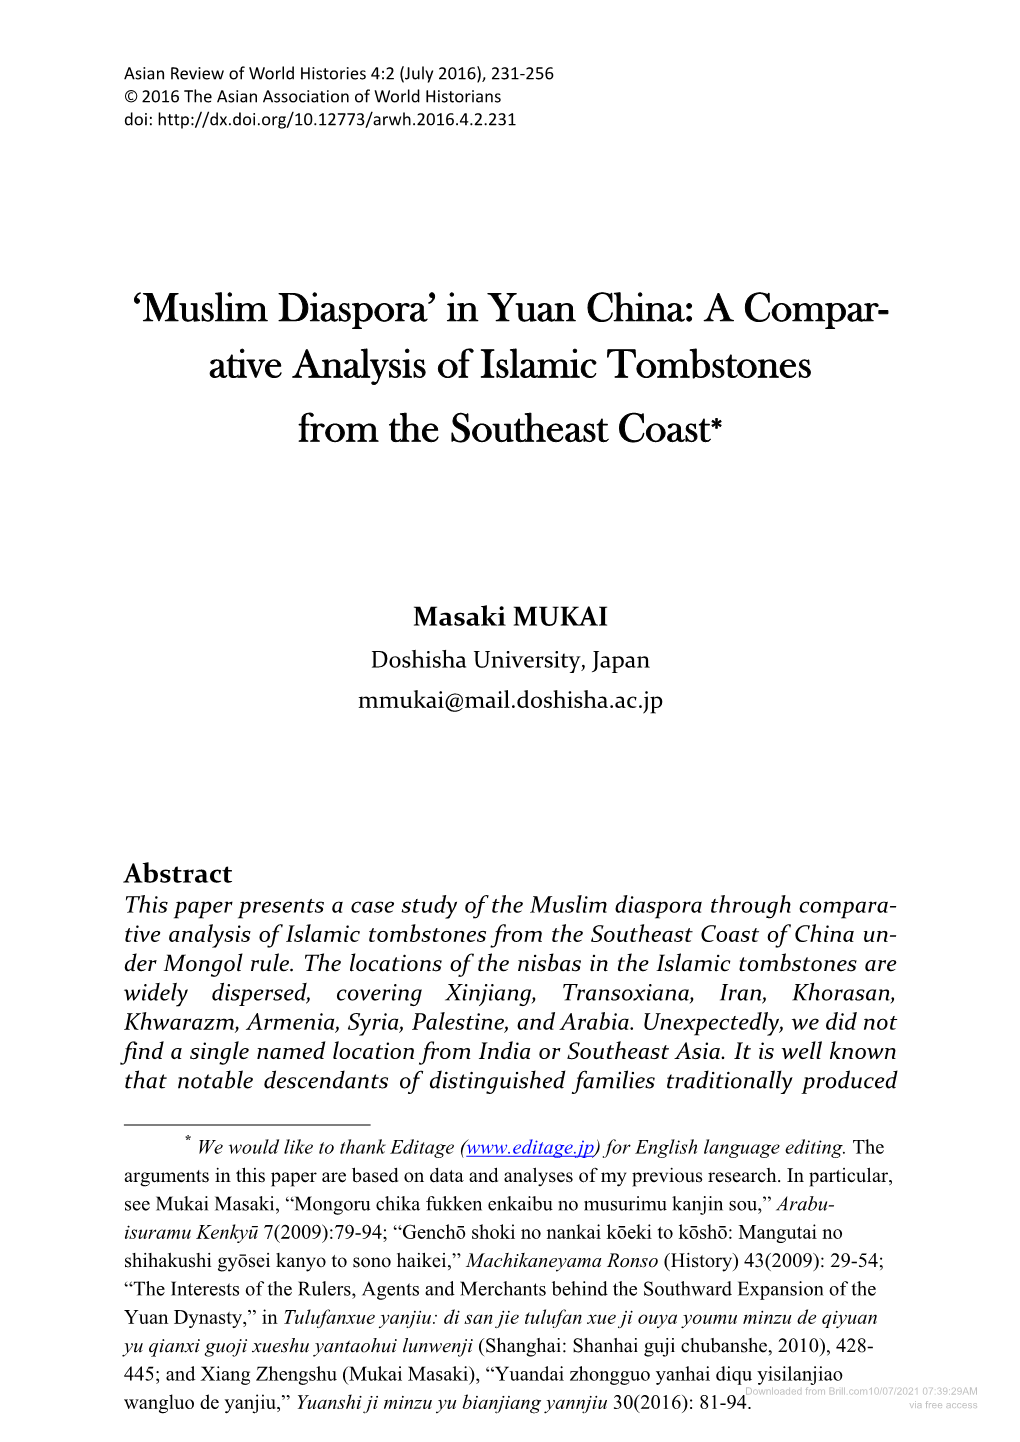 'Muslim Diaspora' in Yuan China: a Compar- Ative Analysis of Islamic Tombstones from the Southeast Coast